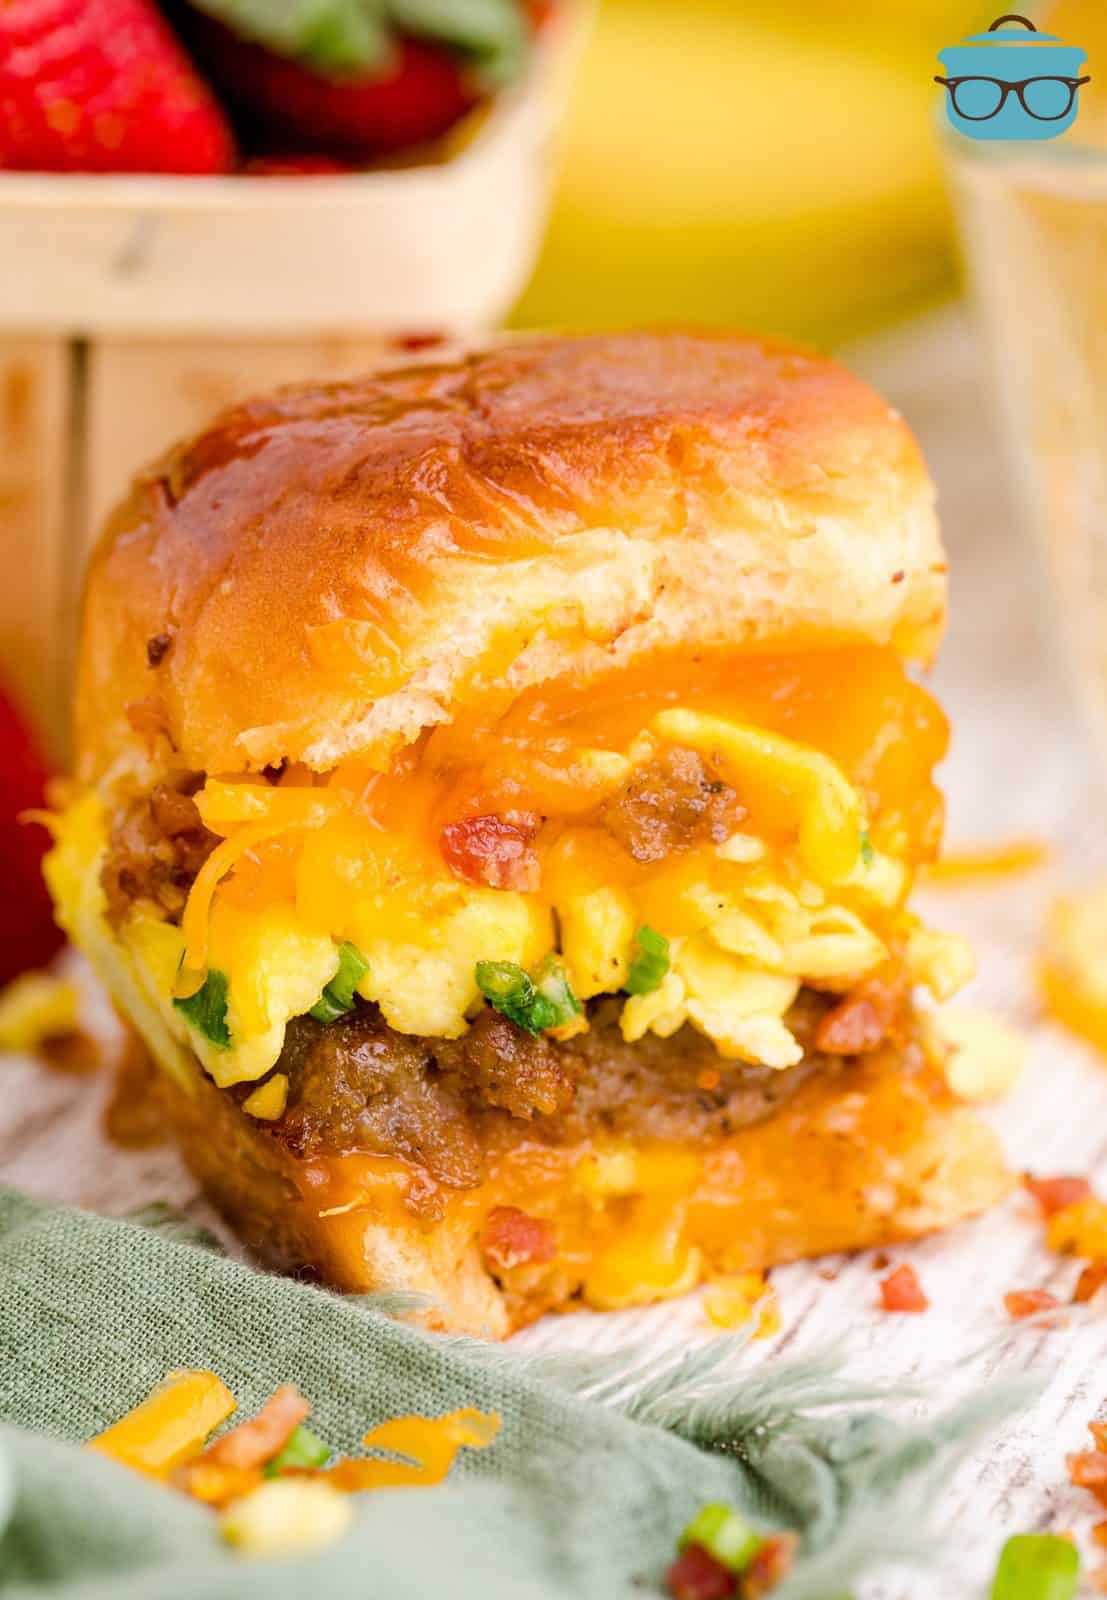 One Breakfast Slider on board showing the layers meat, egg and cheese.